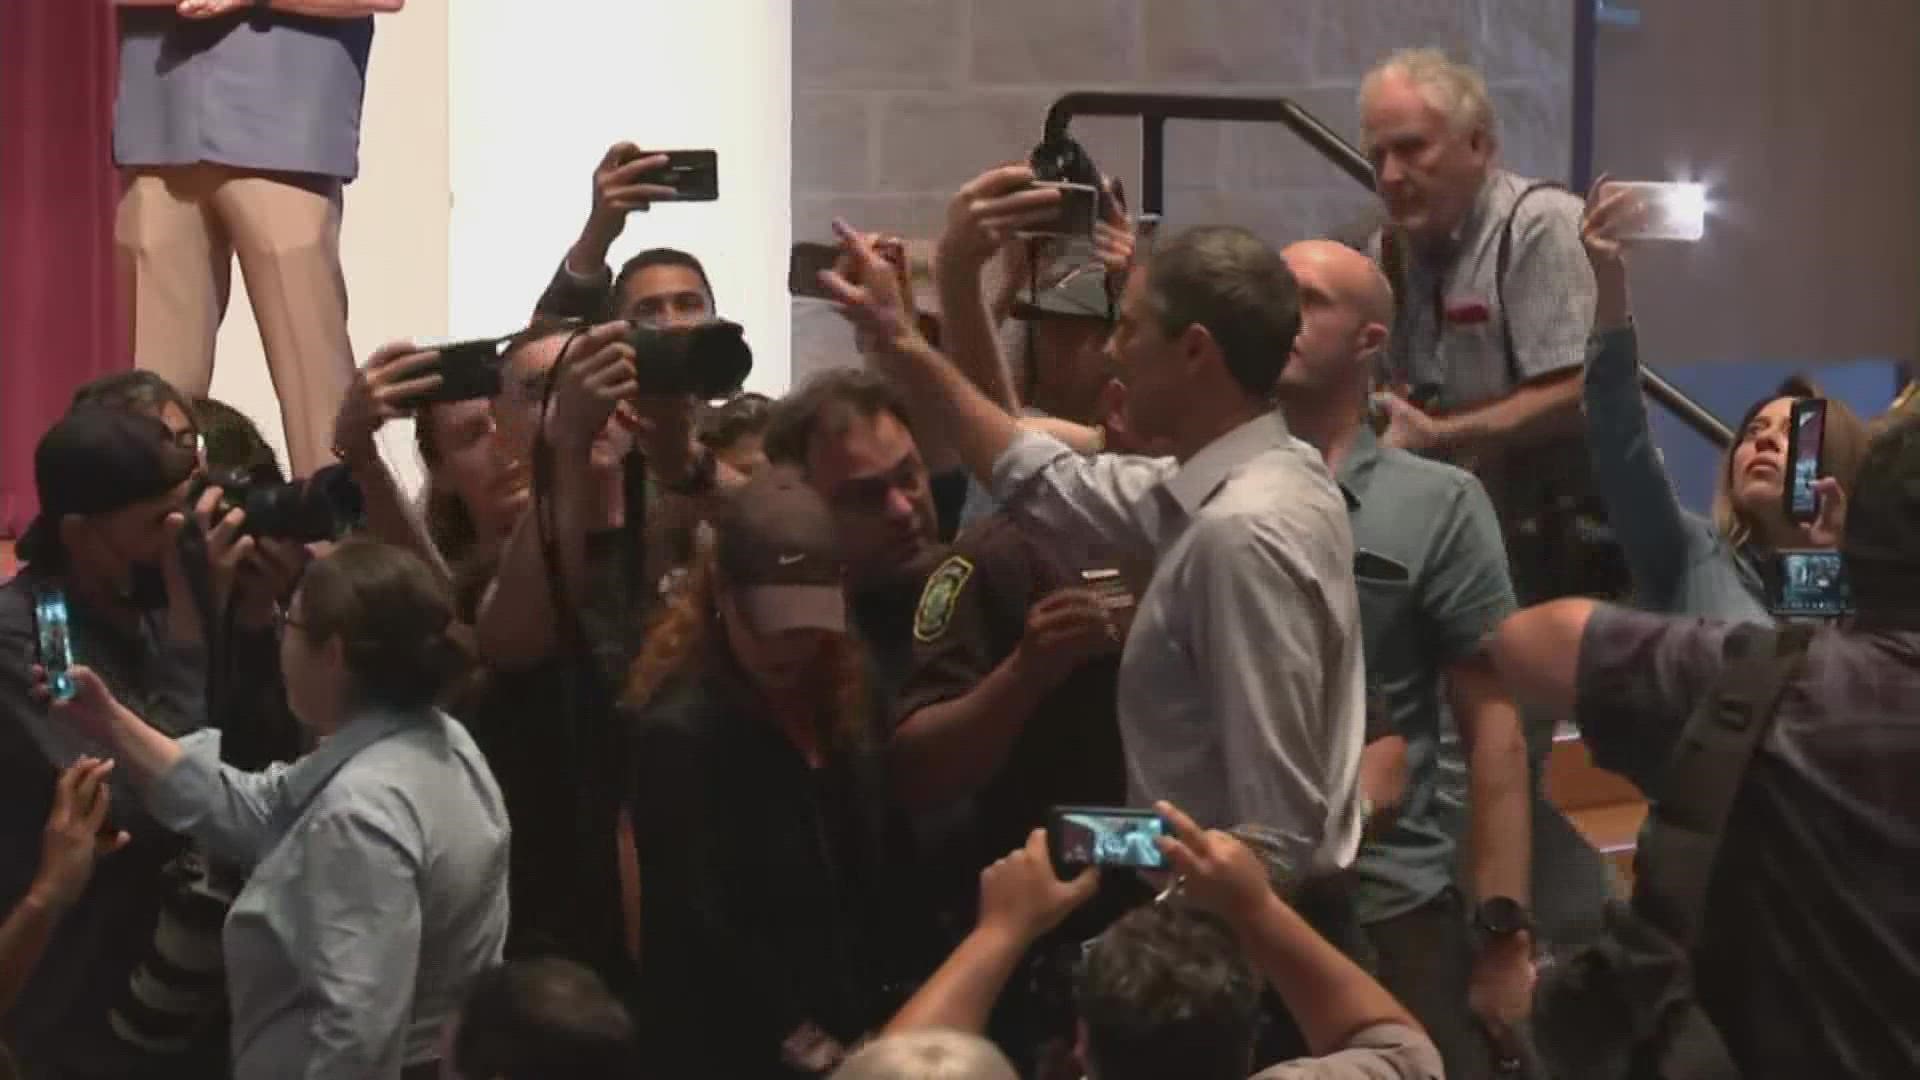 Beto O'Rourke was escorted out of Gov. Greg Abbott's press conference on the Texas school shooting.